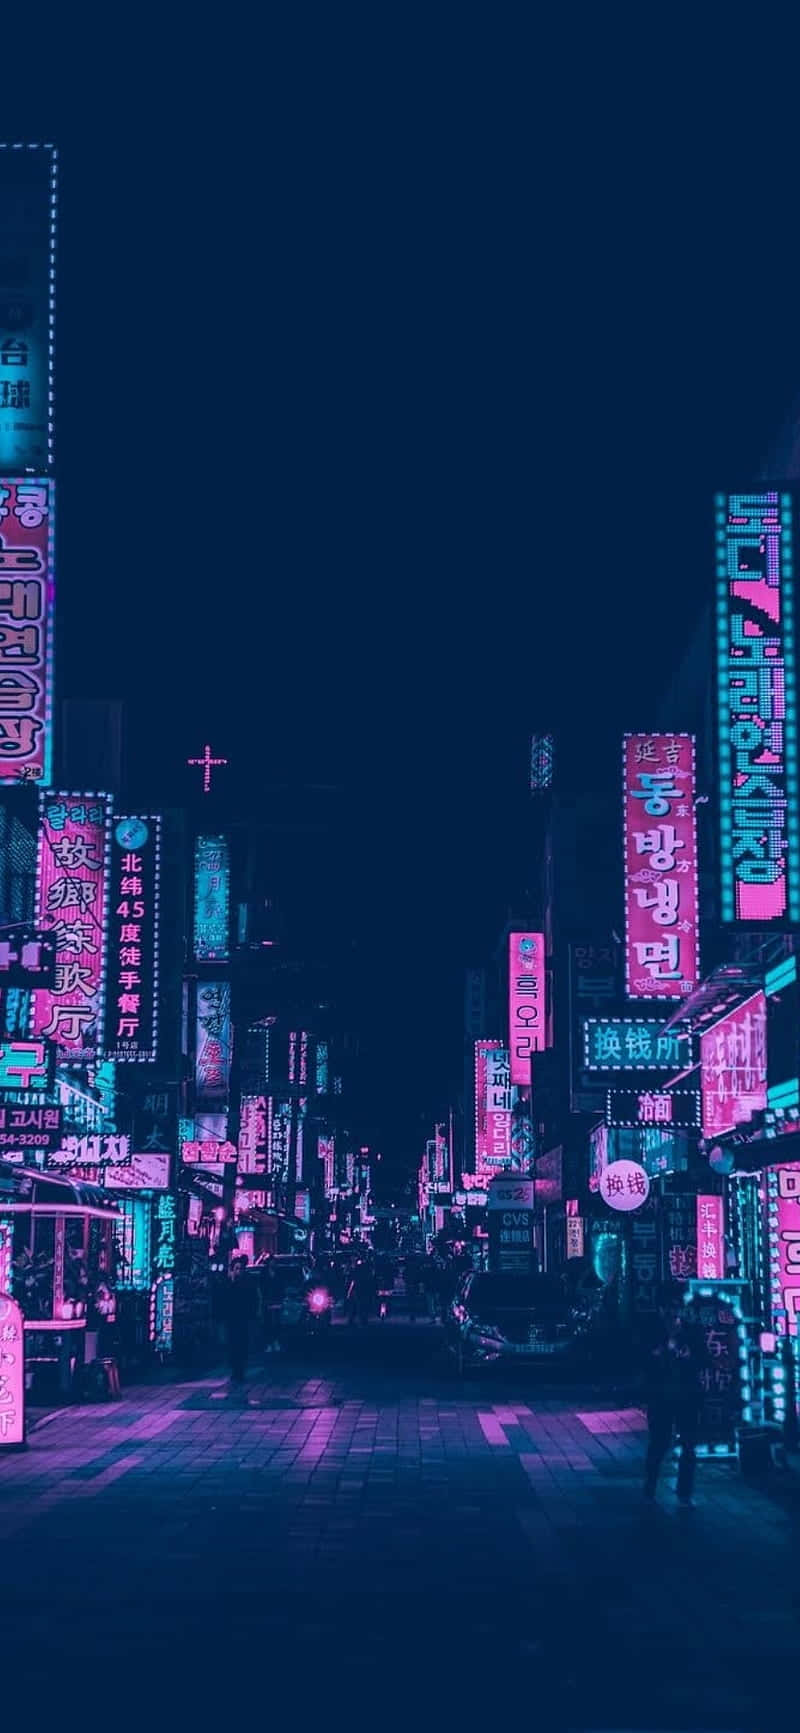 Blue And Pink Aesthetic Neon City Light Wallpaper